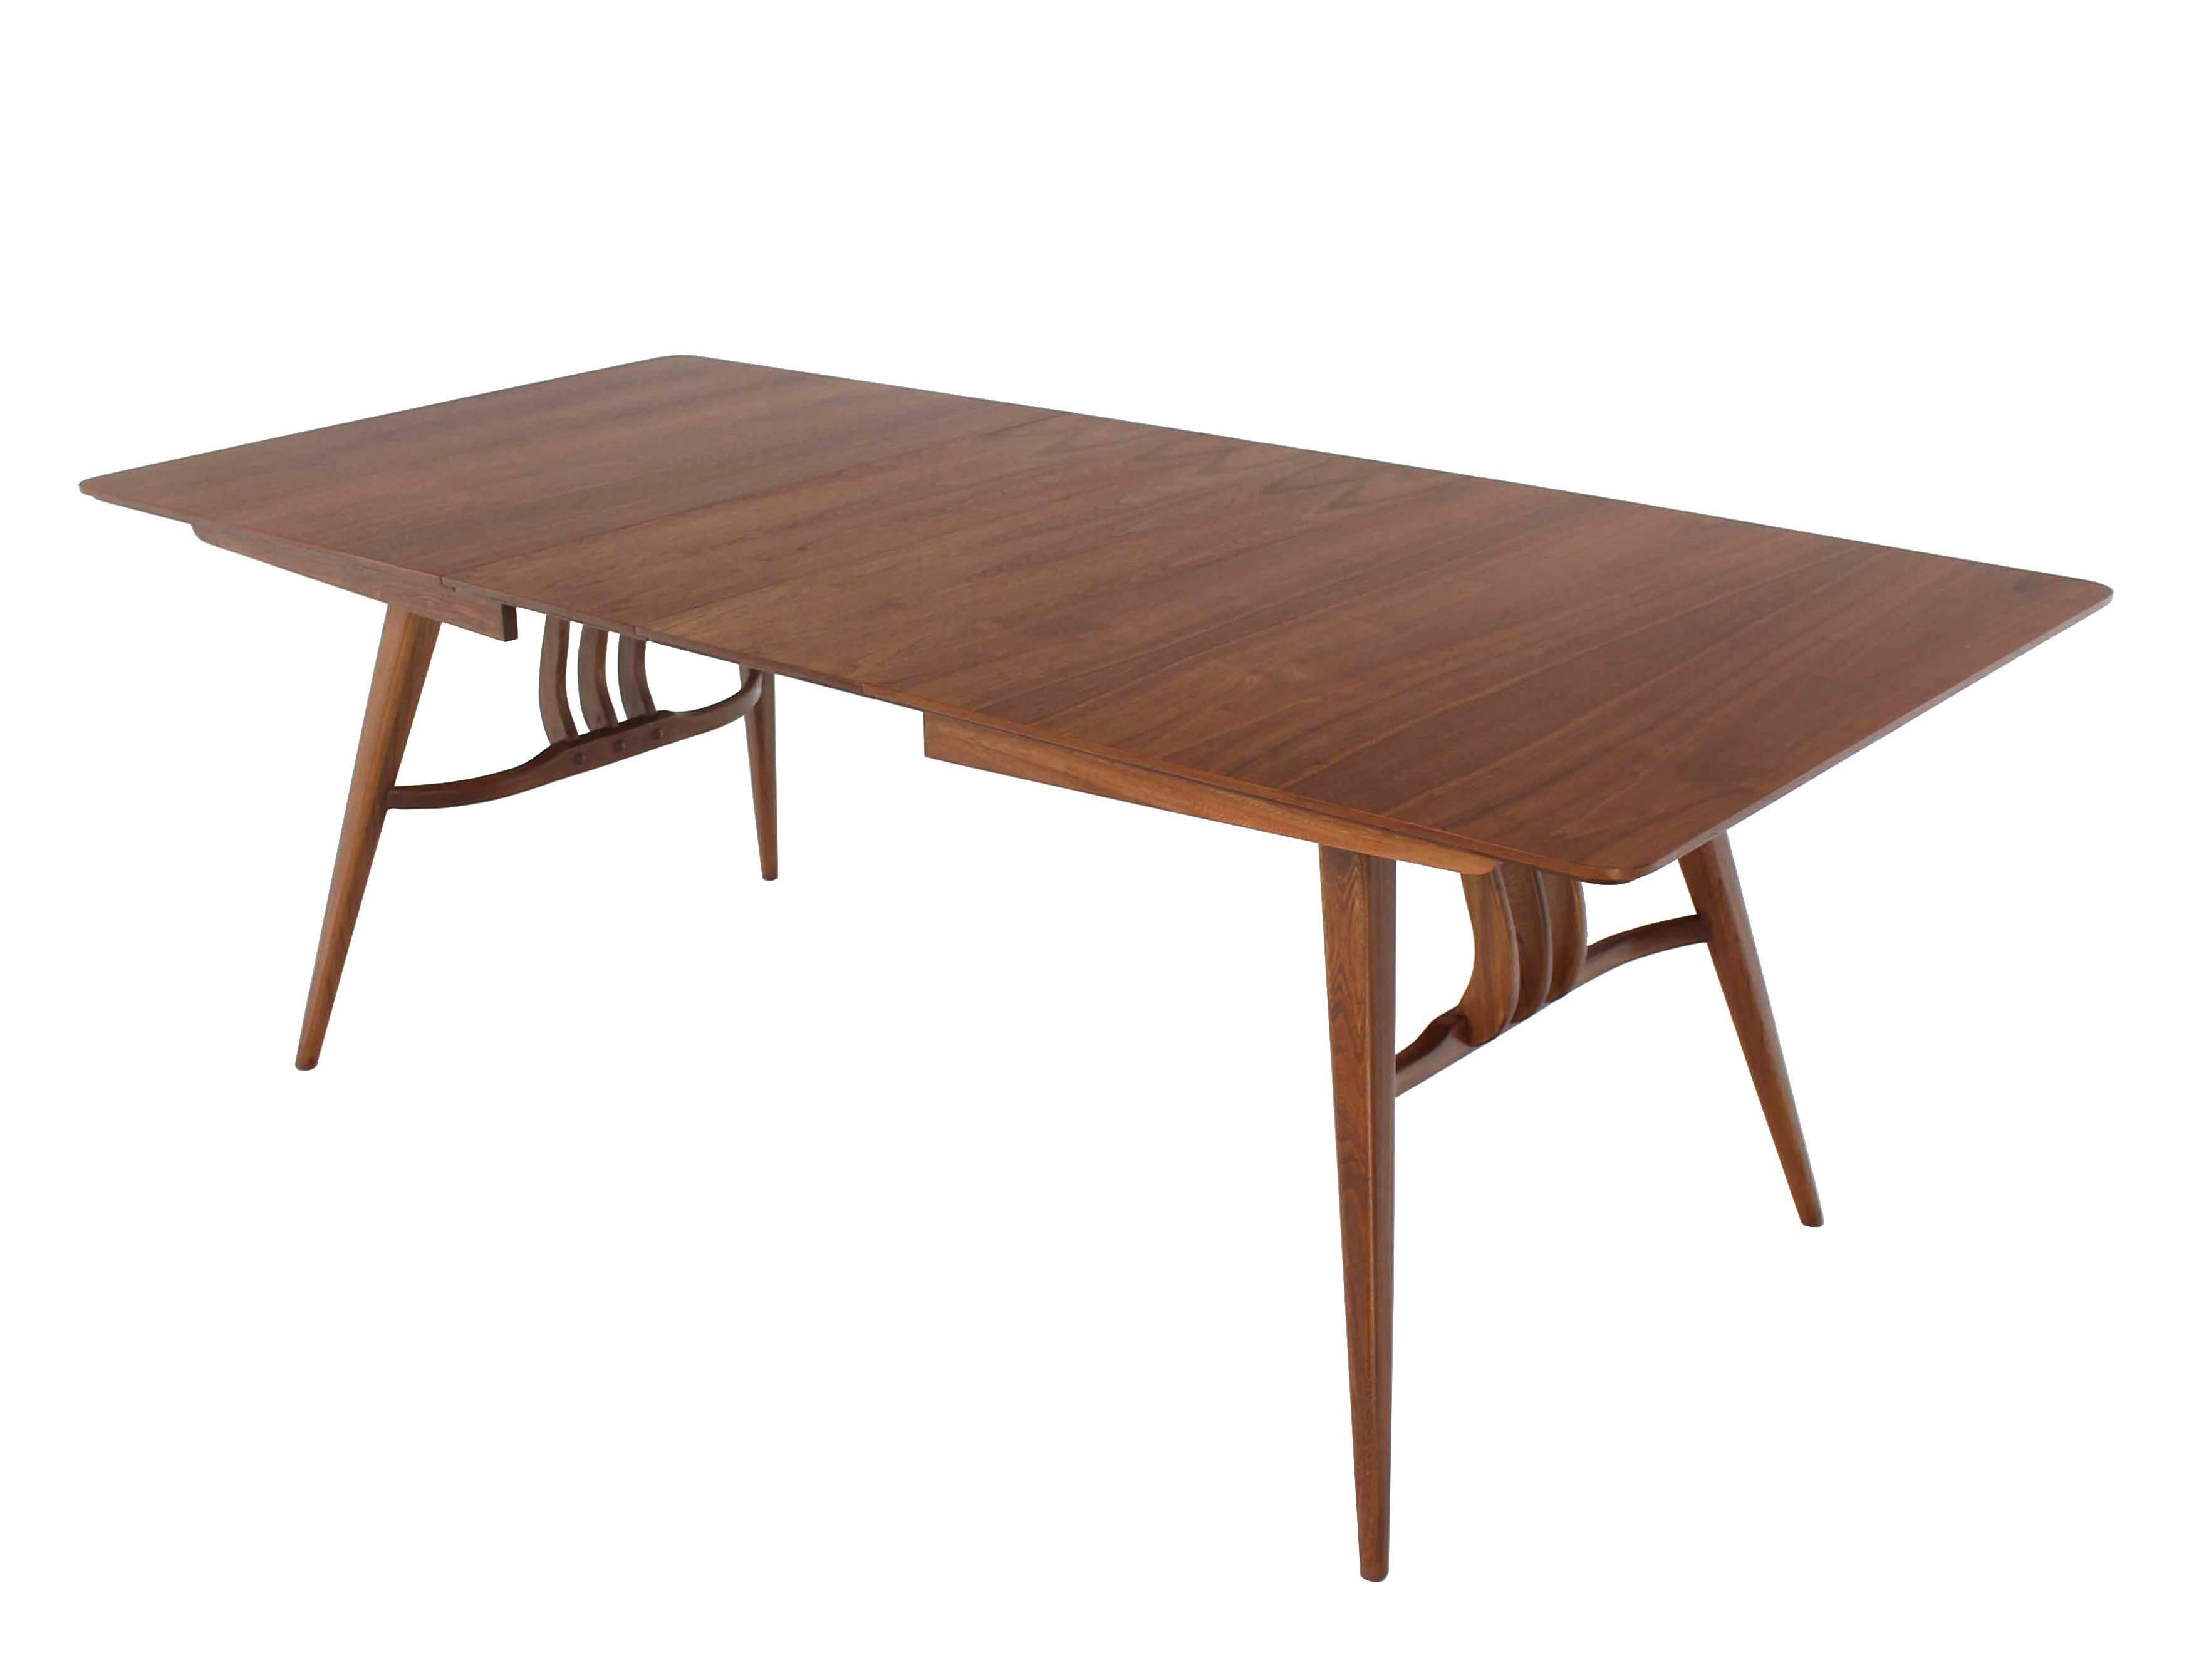 Very nice Mid-Century Modern sculptured base dining table with 2 x 12